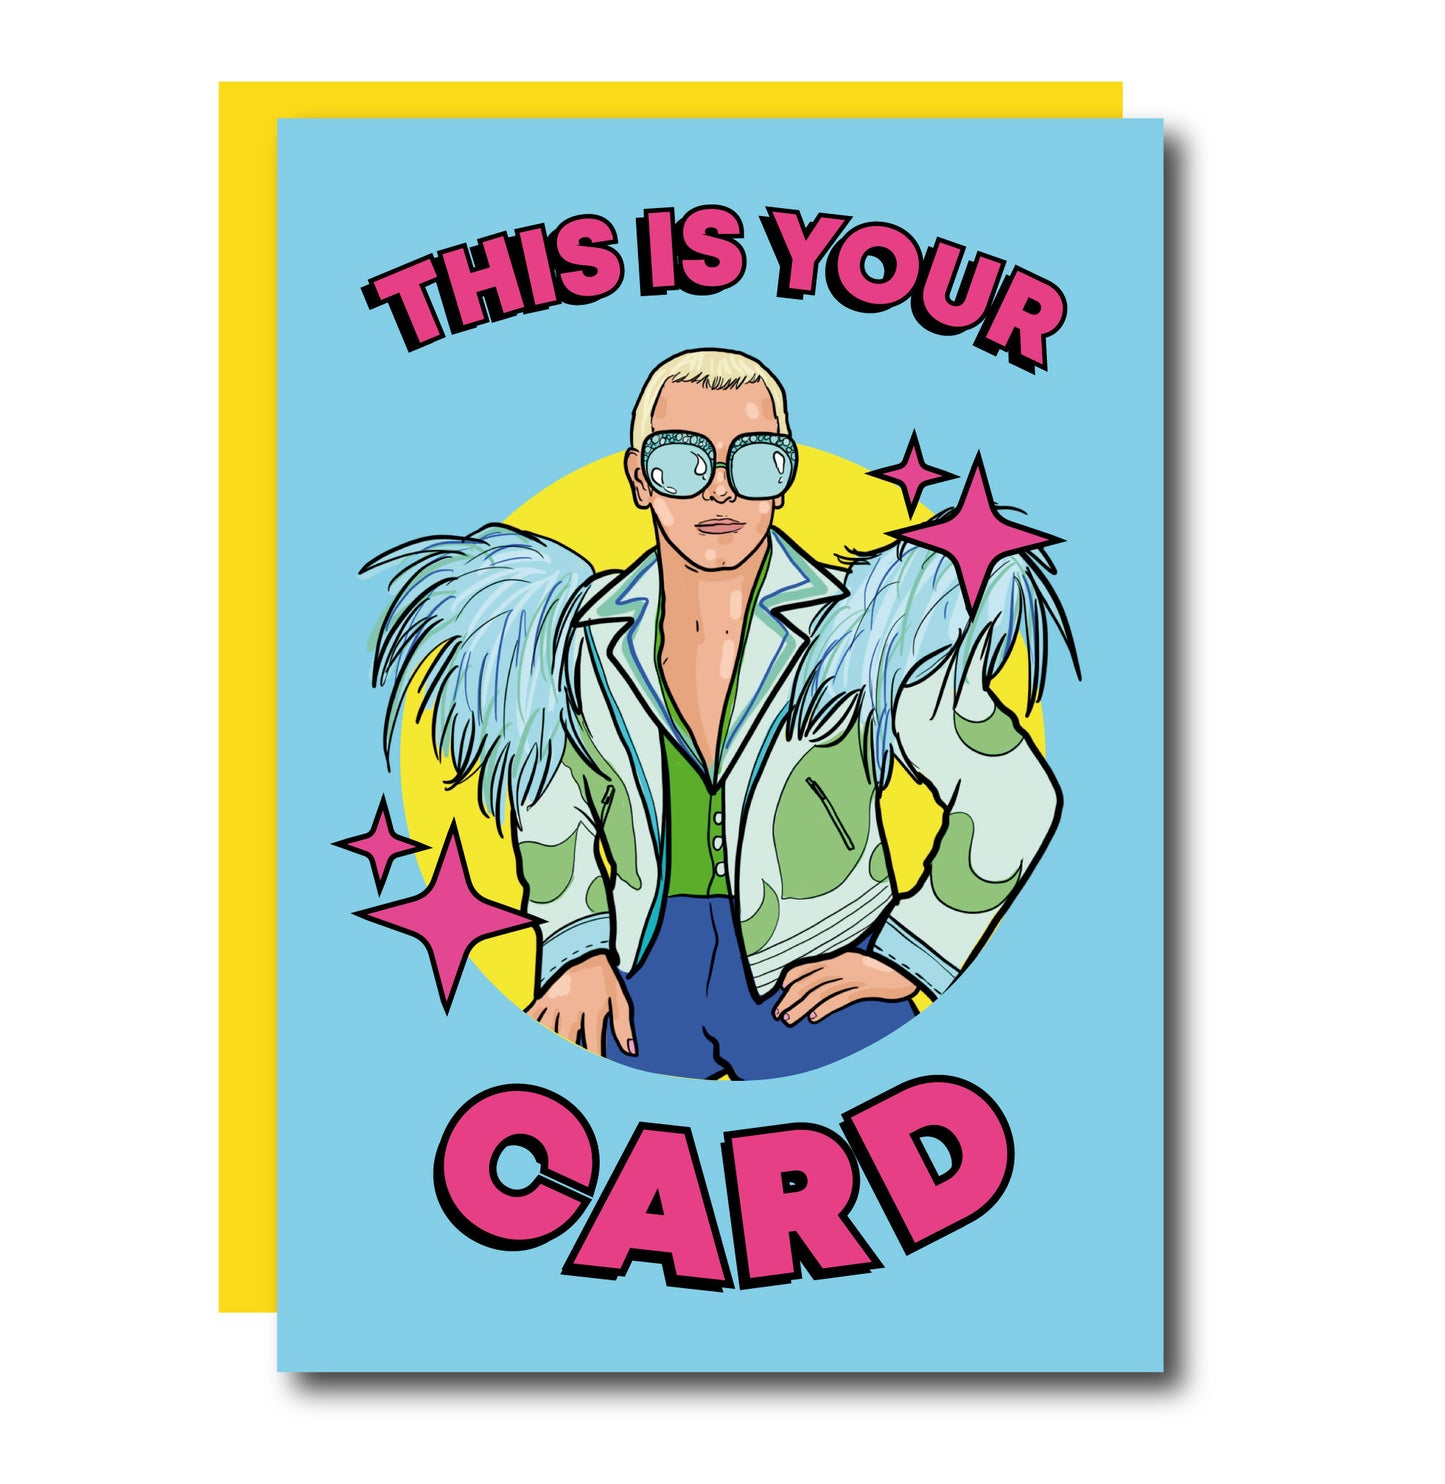 THIS IS YOUR CARD